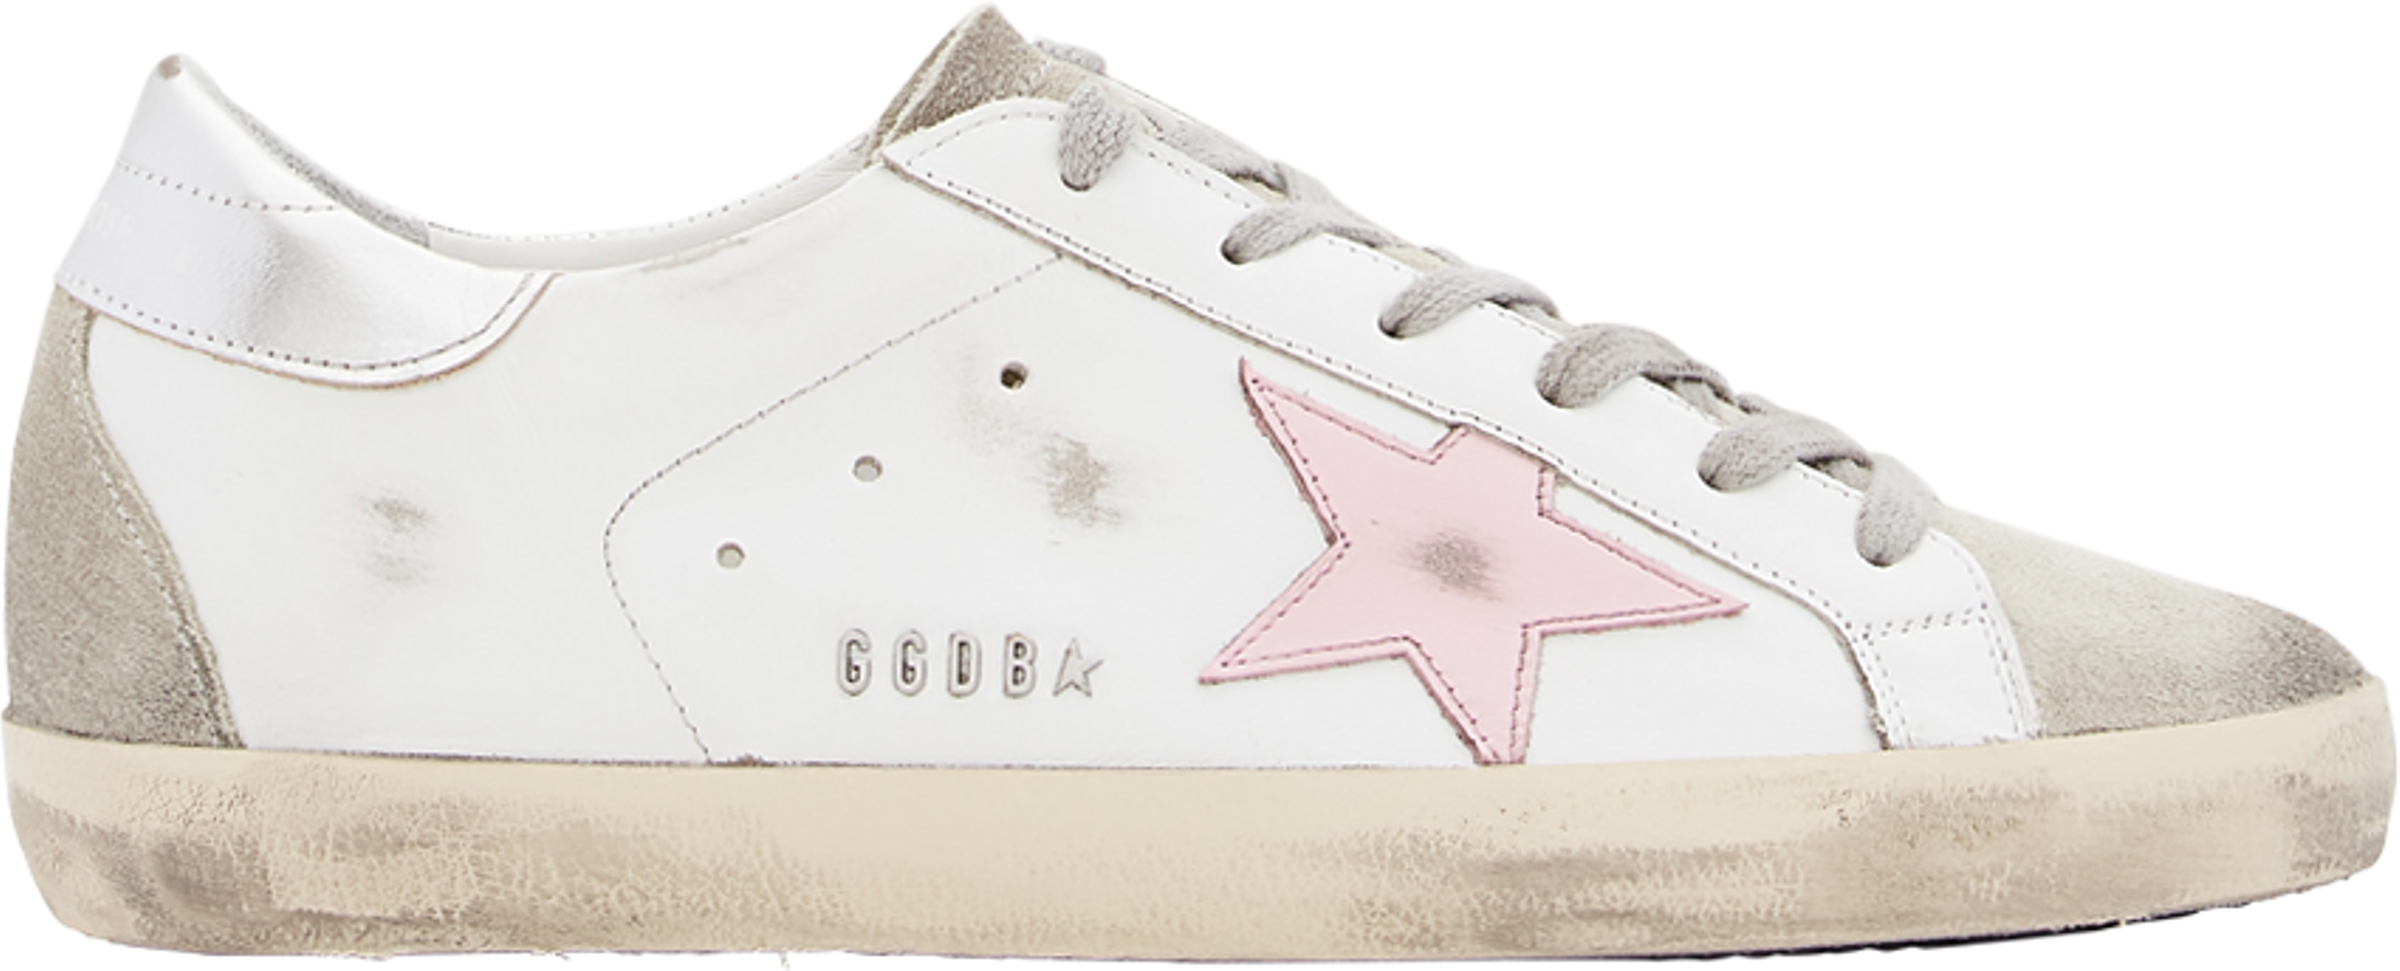 Buy Golden Goose Wmns Superstar 'White Orchid' - GWF00102 F002435 81482 ...